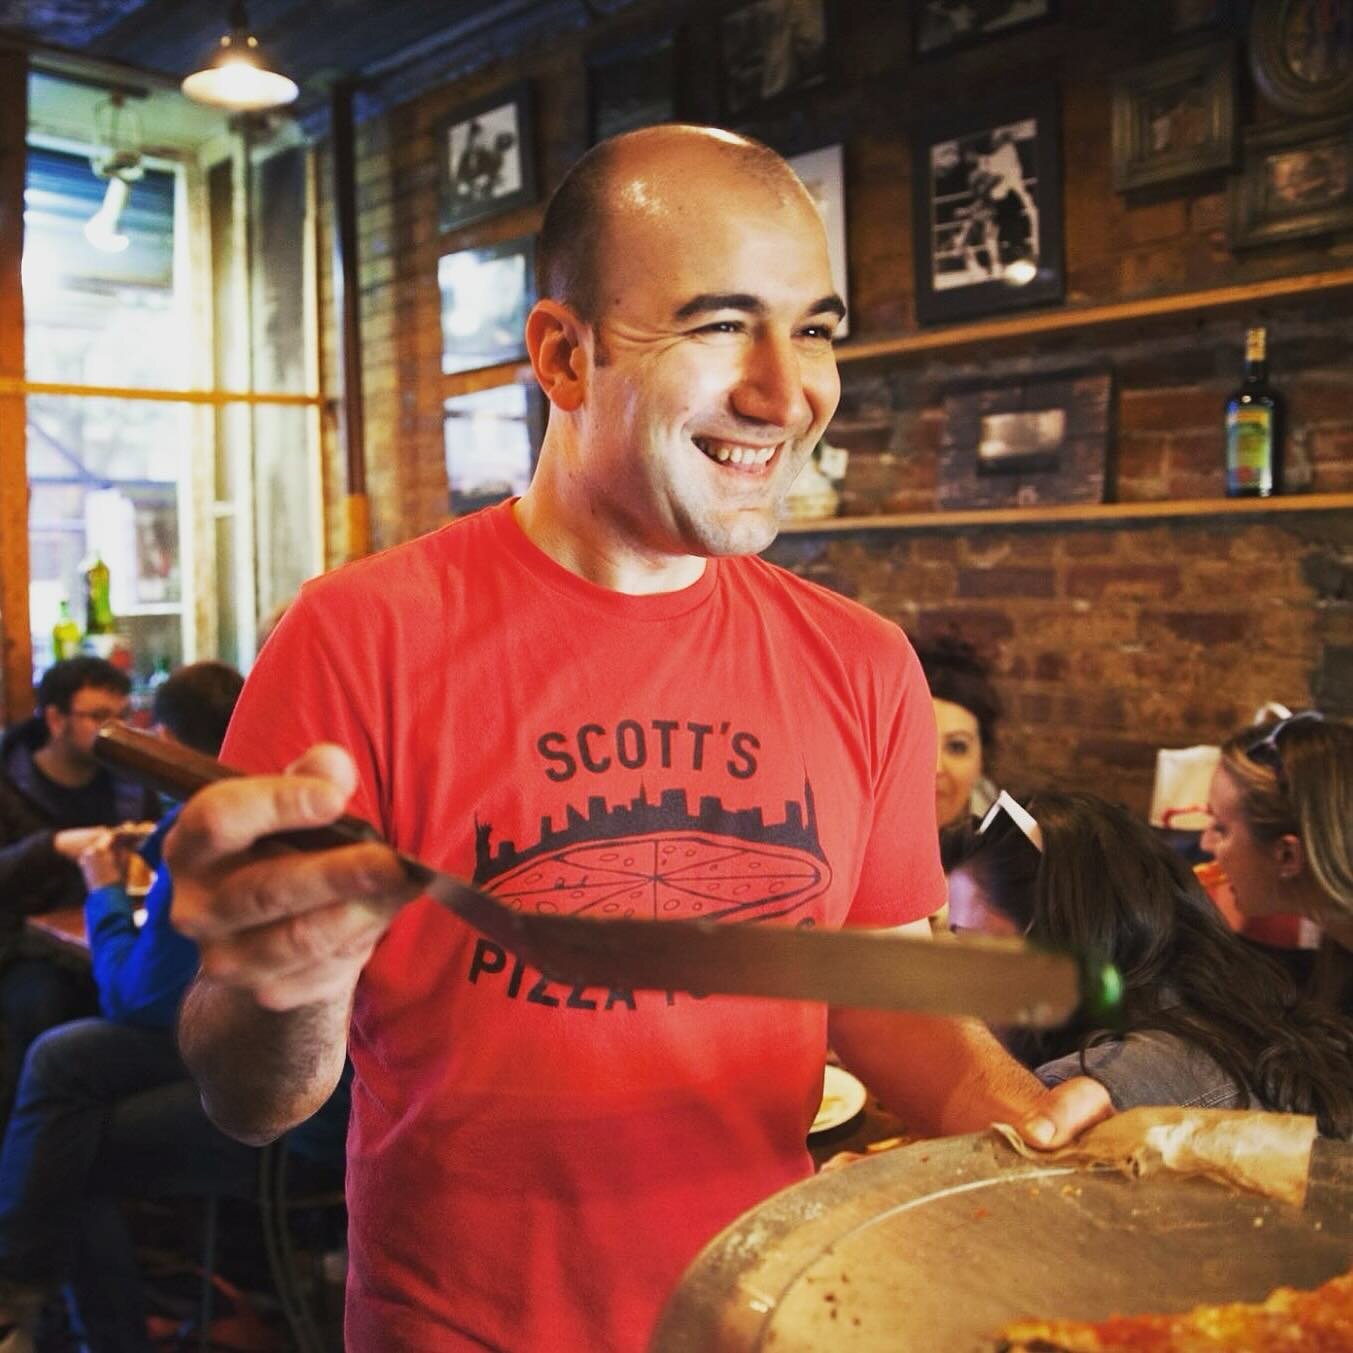 Happy Birthday Joe! There is no Scott &amp; Joe without you we are so very grateful you were born. P.S. we&rsquo;re closing at 4 today to celebrate. #scottandjoe
. 
. 
.
#cheese #cheeselover #foodgasm #cheesy #grilledcheese #cheeseboard #wine #winean